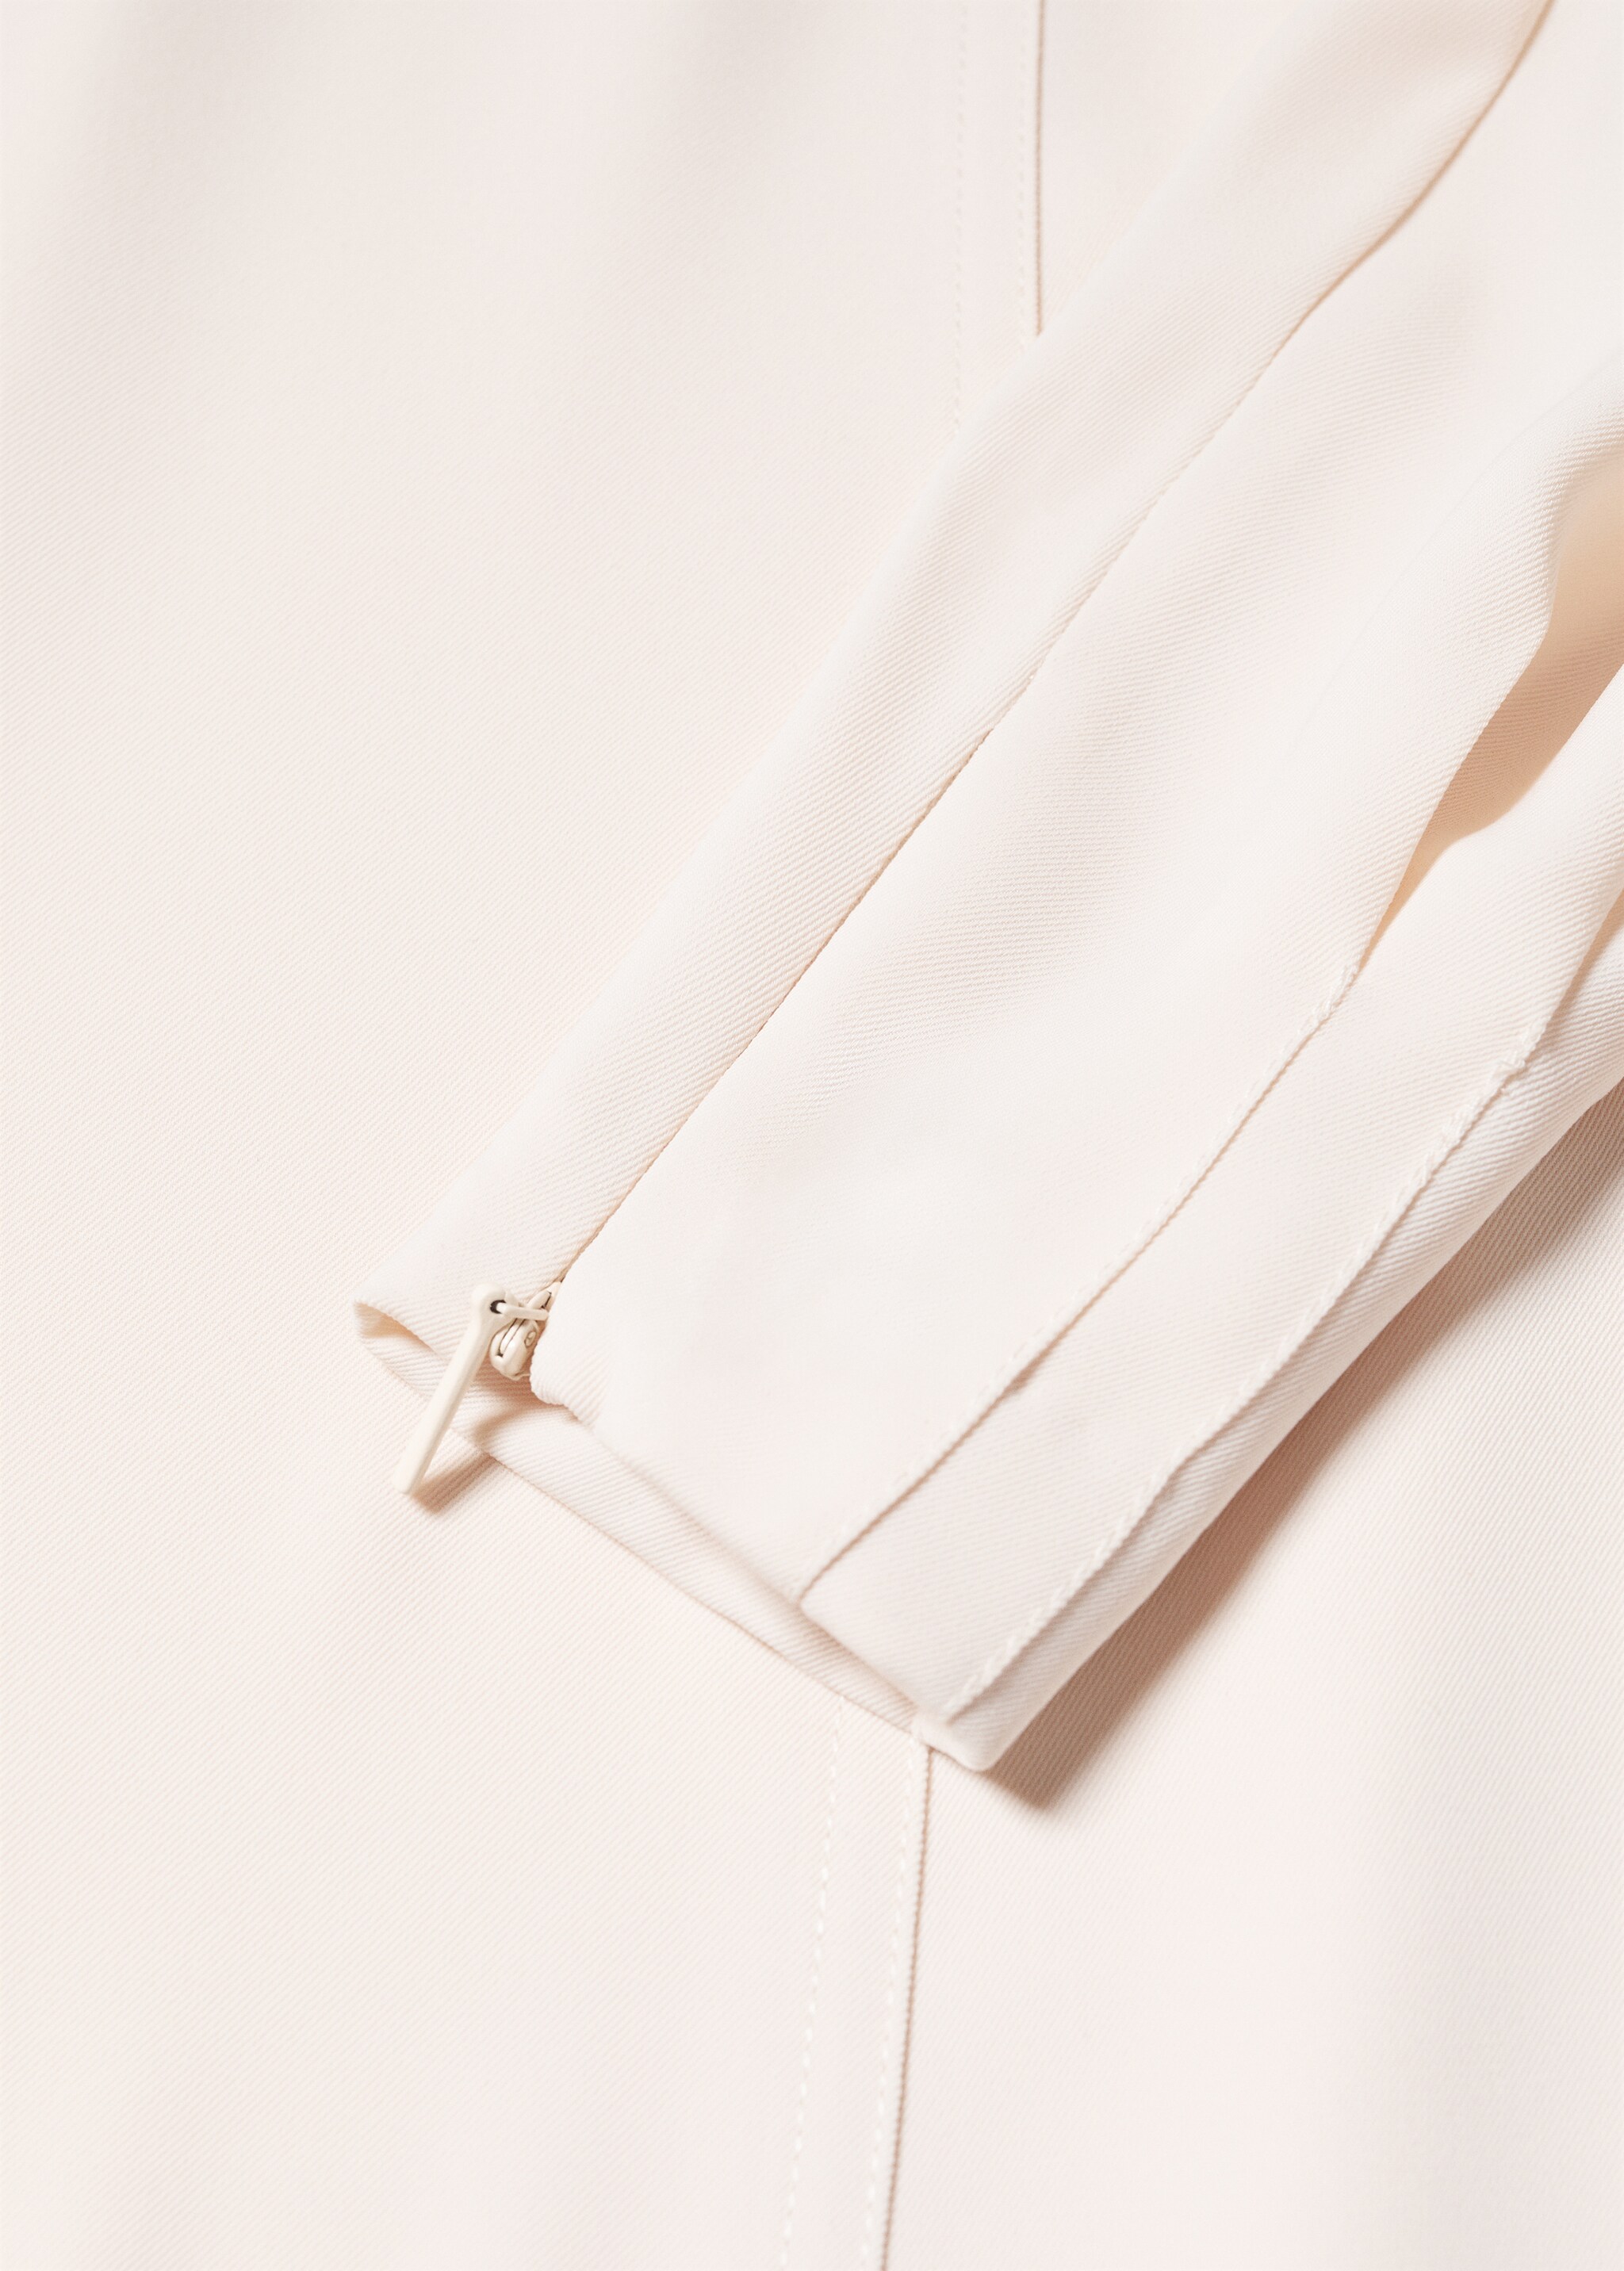 Bow shirt dress - Details of the article 8